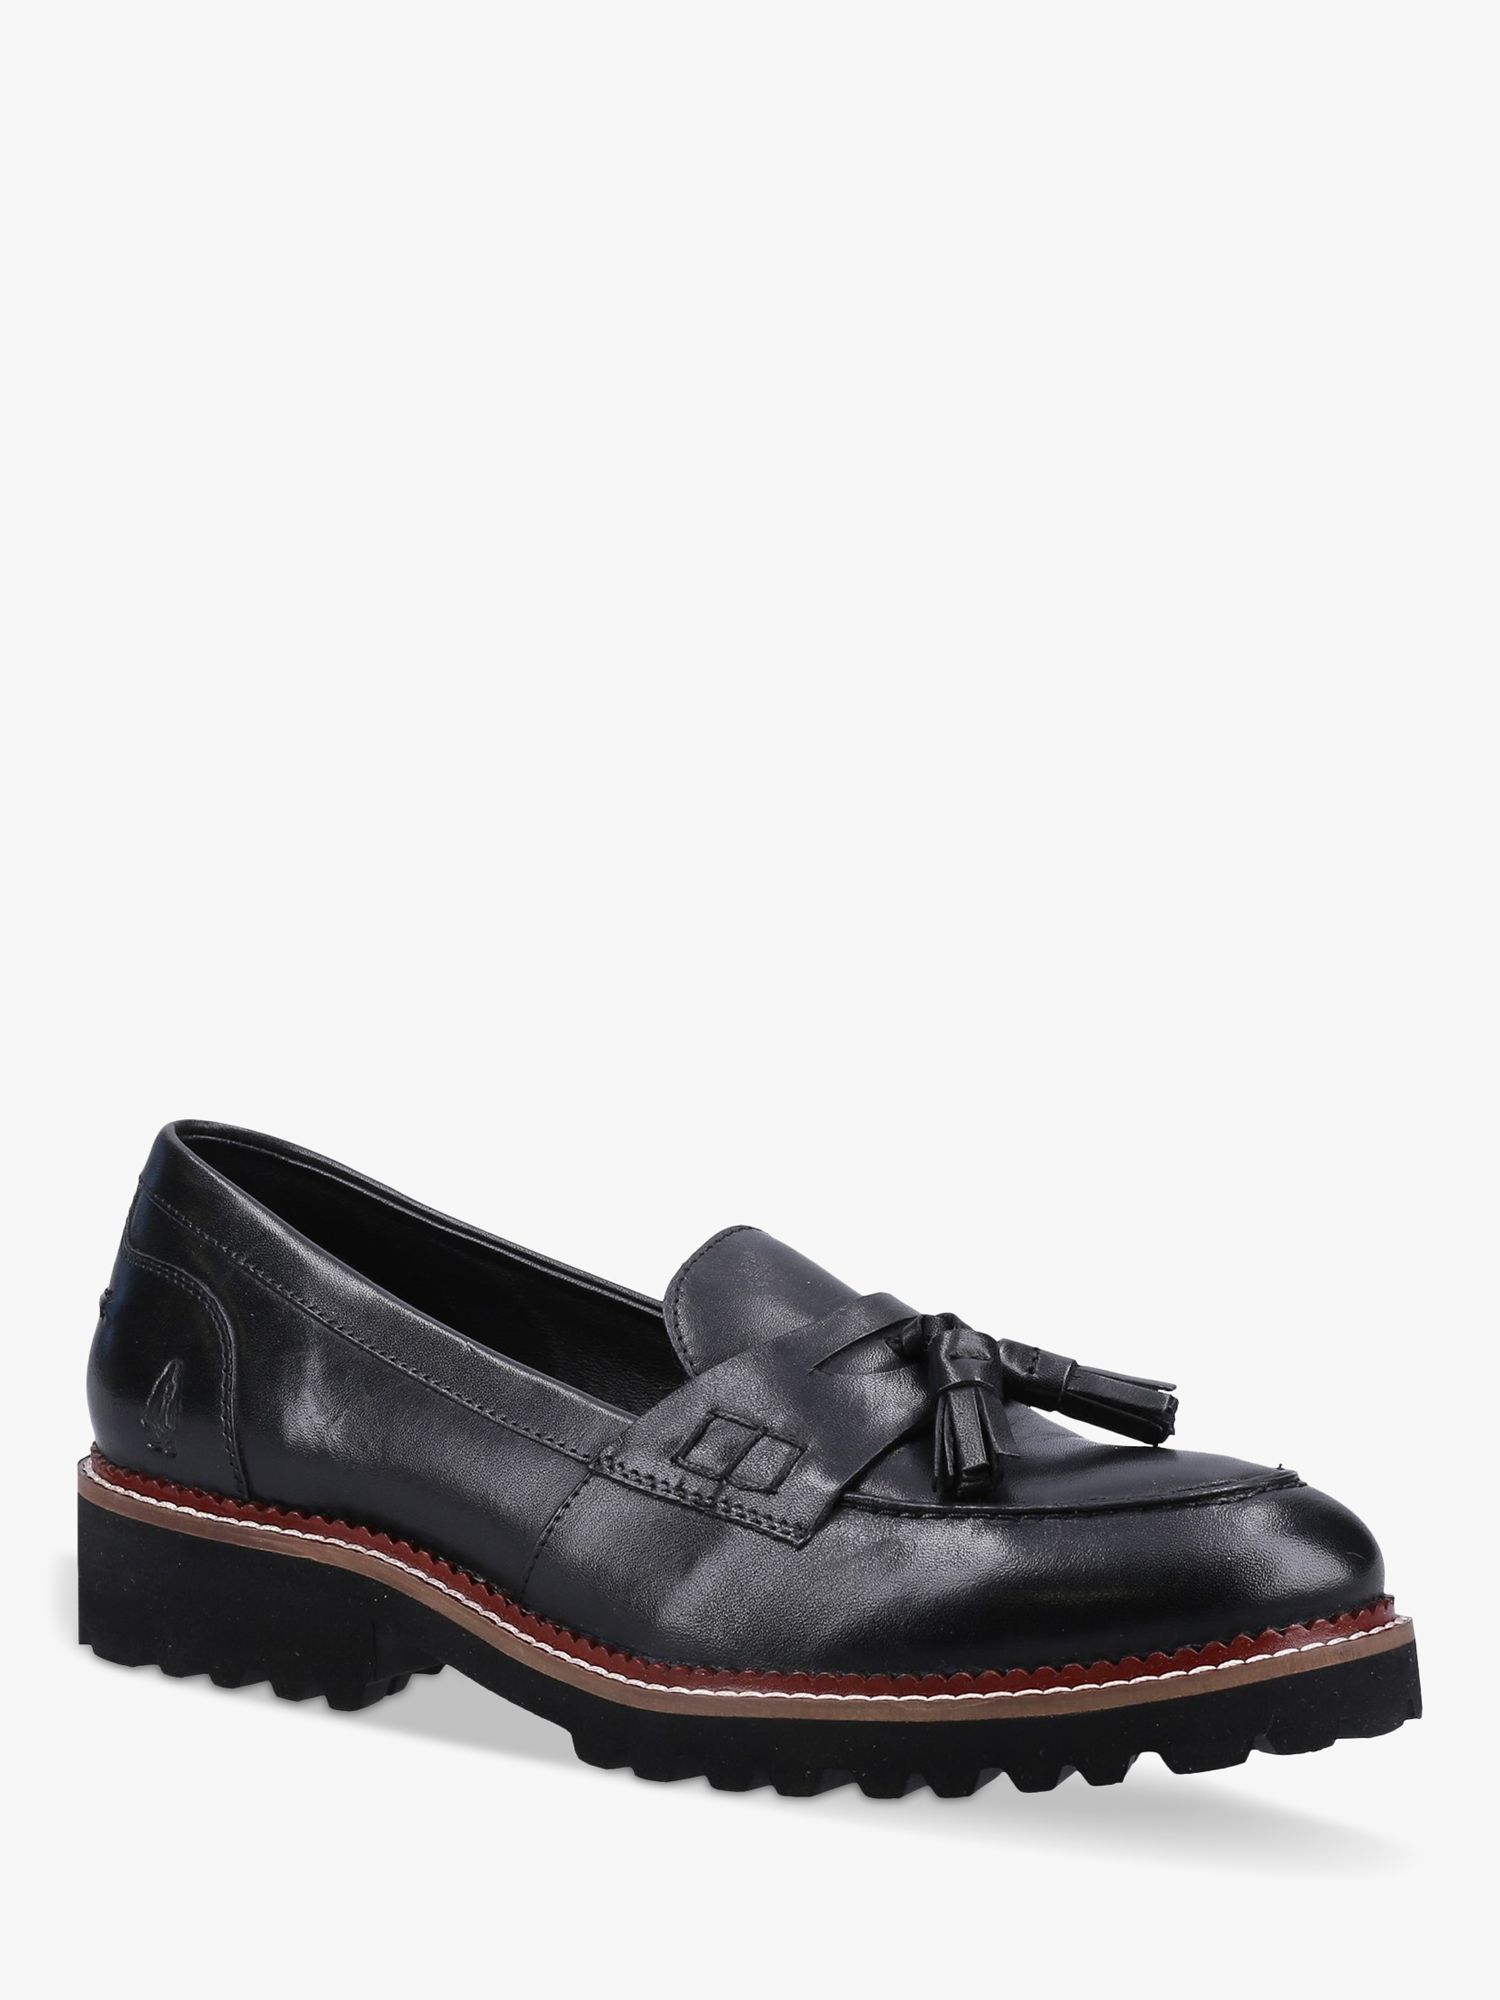 Hush Puppies Ginny Leather Loafers, Black at John Lewis & Partners